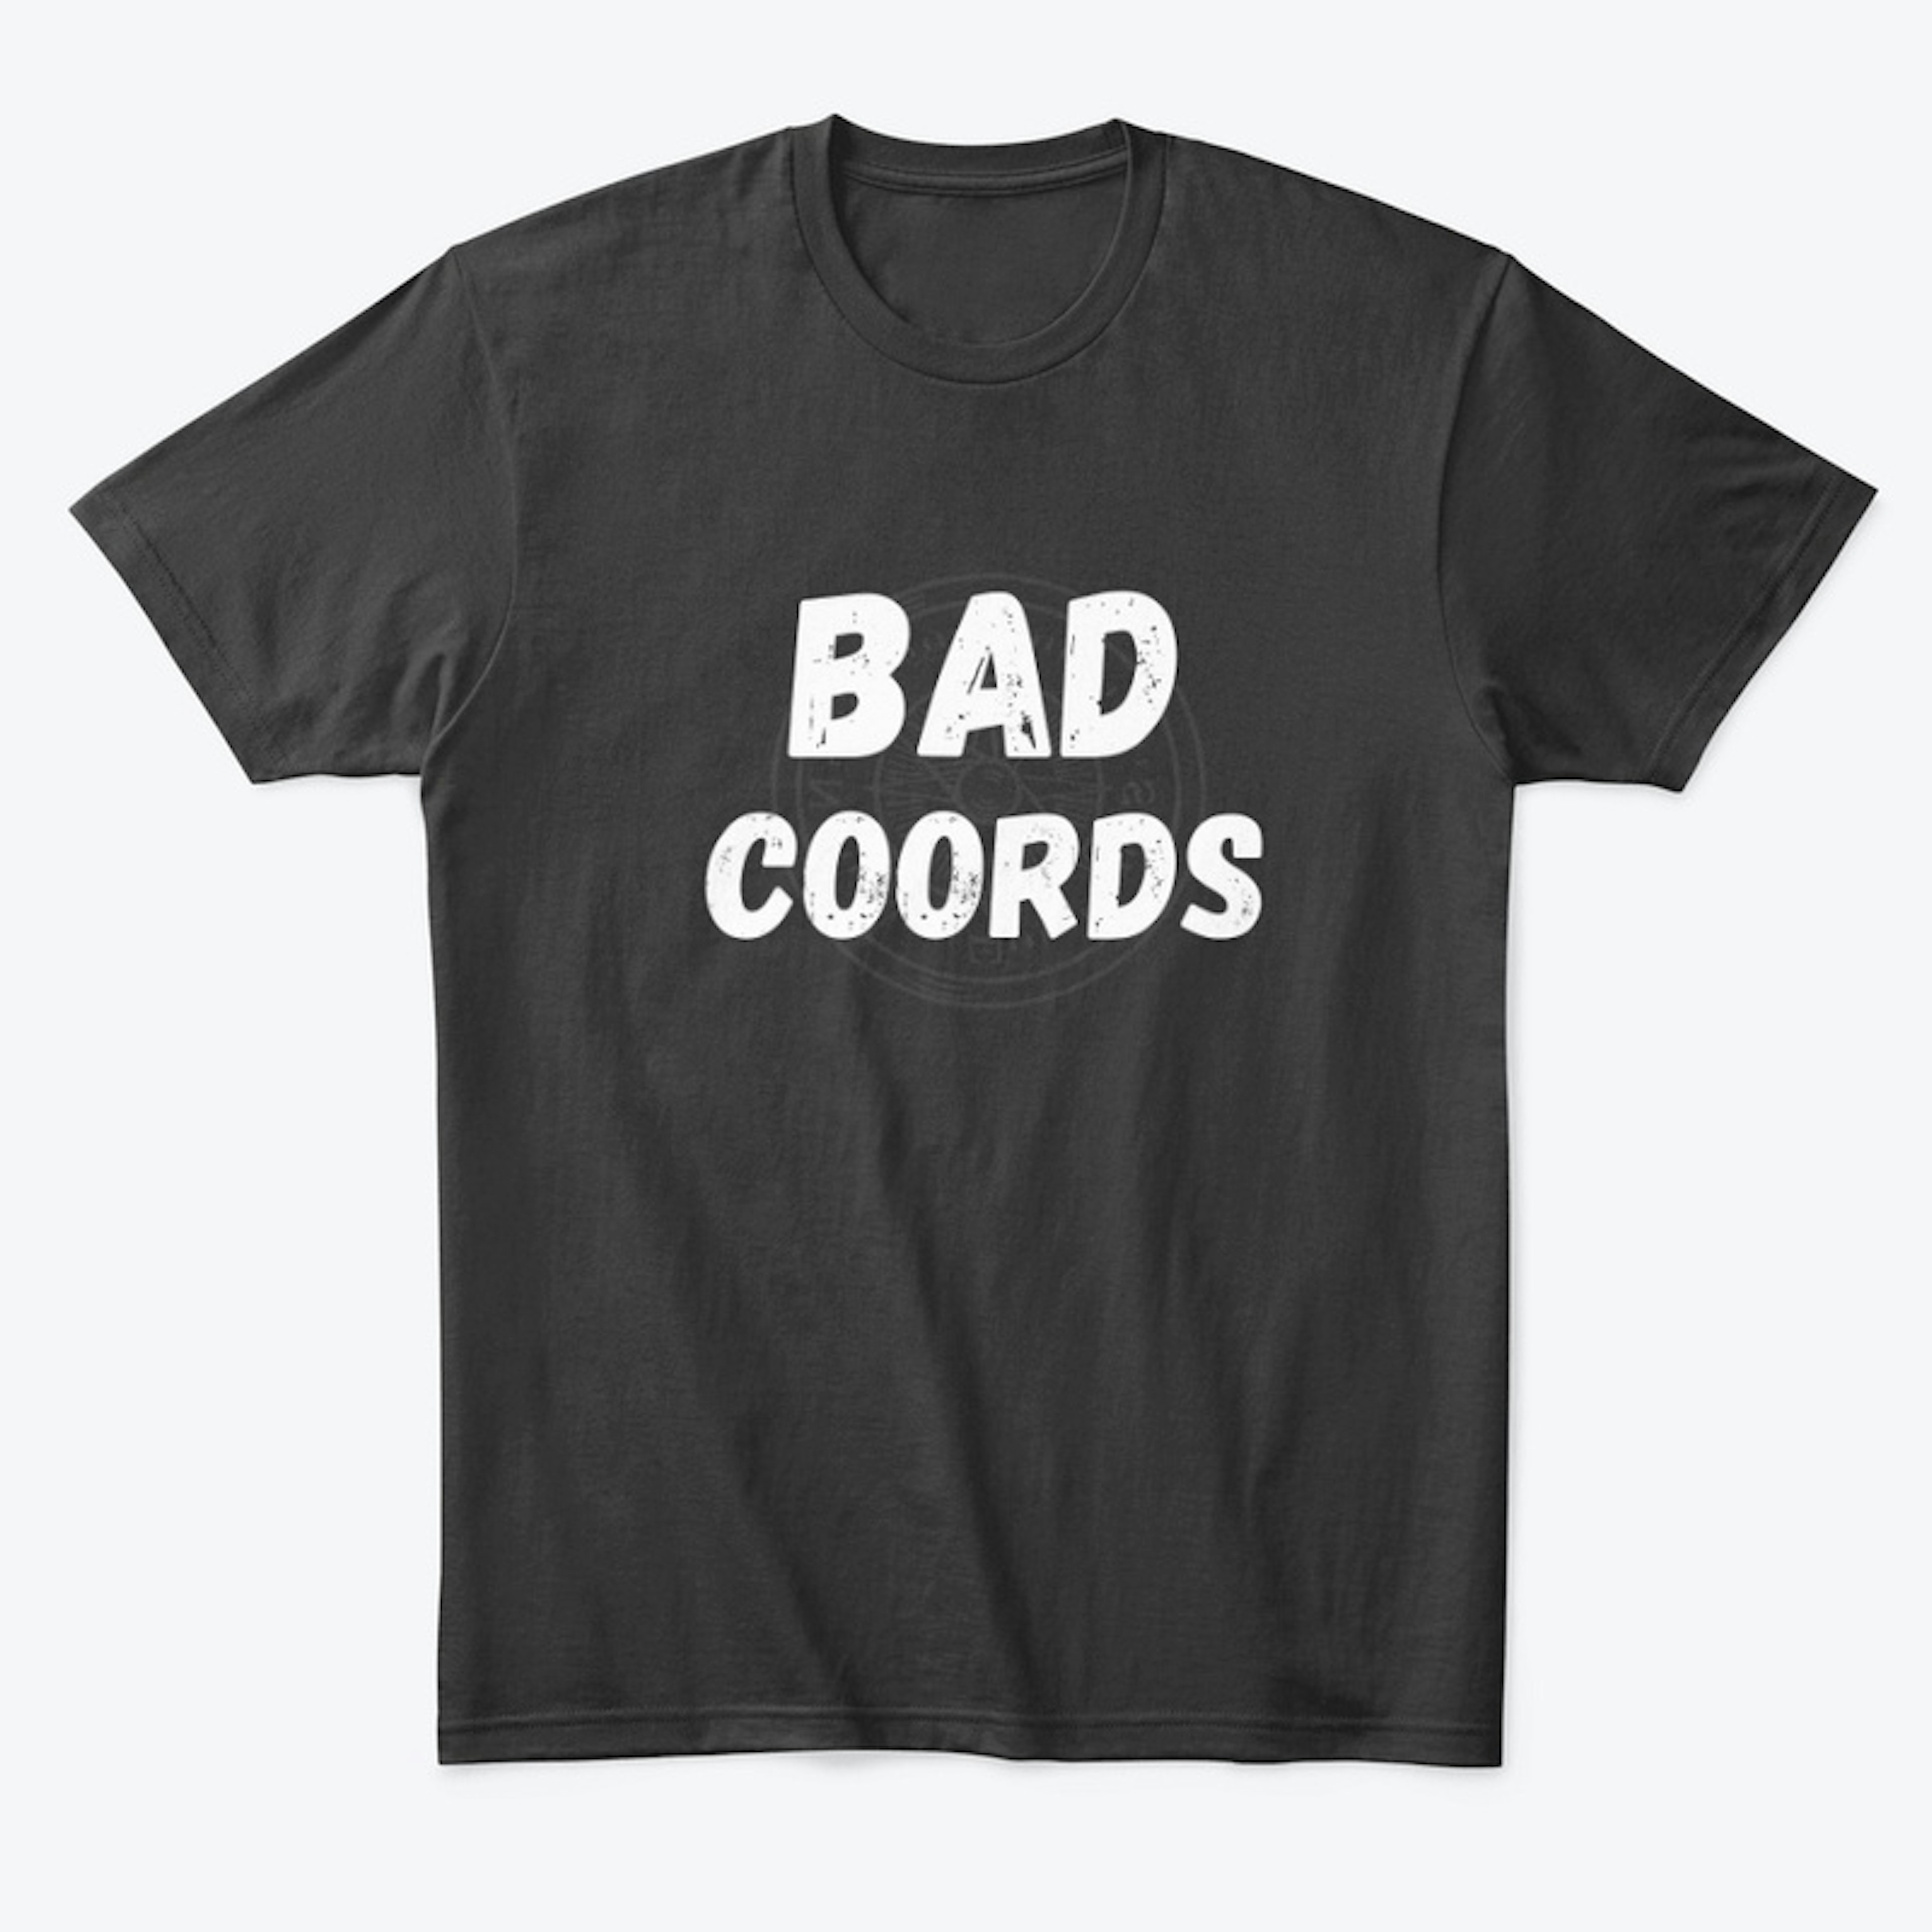 Bad Coords - You Got This!